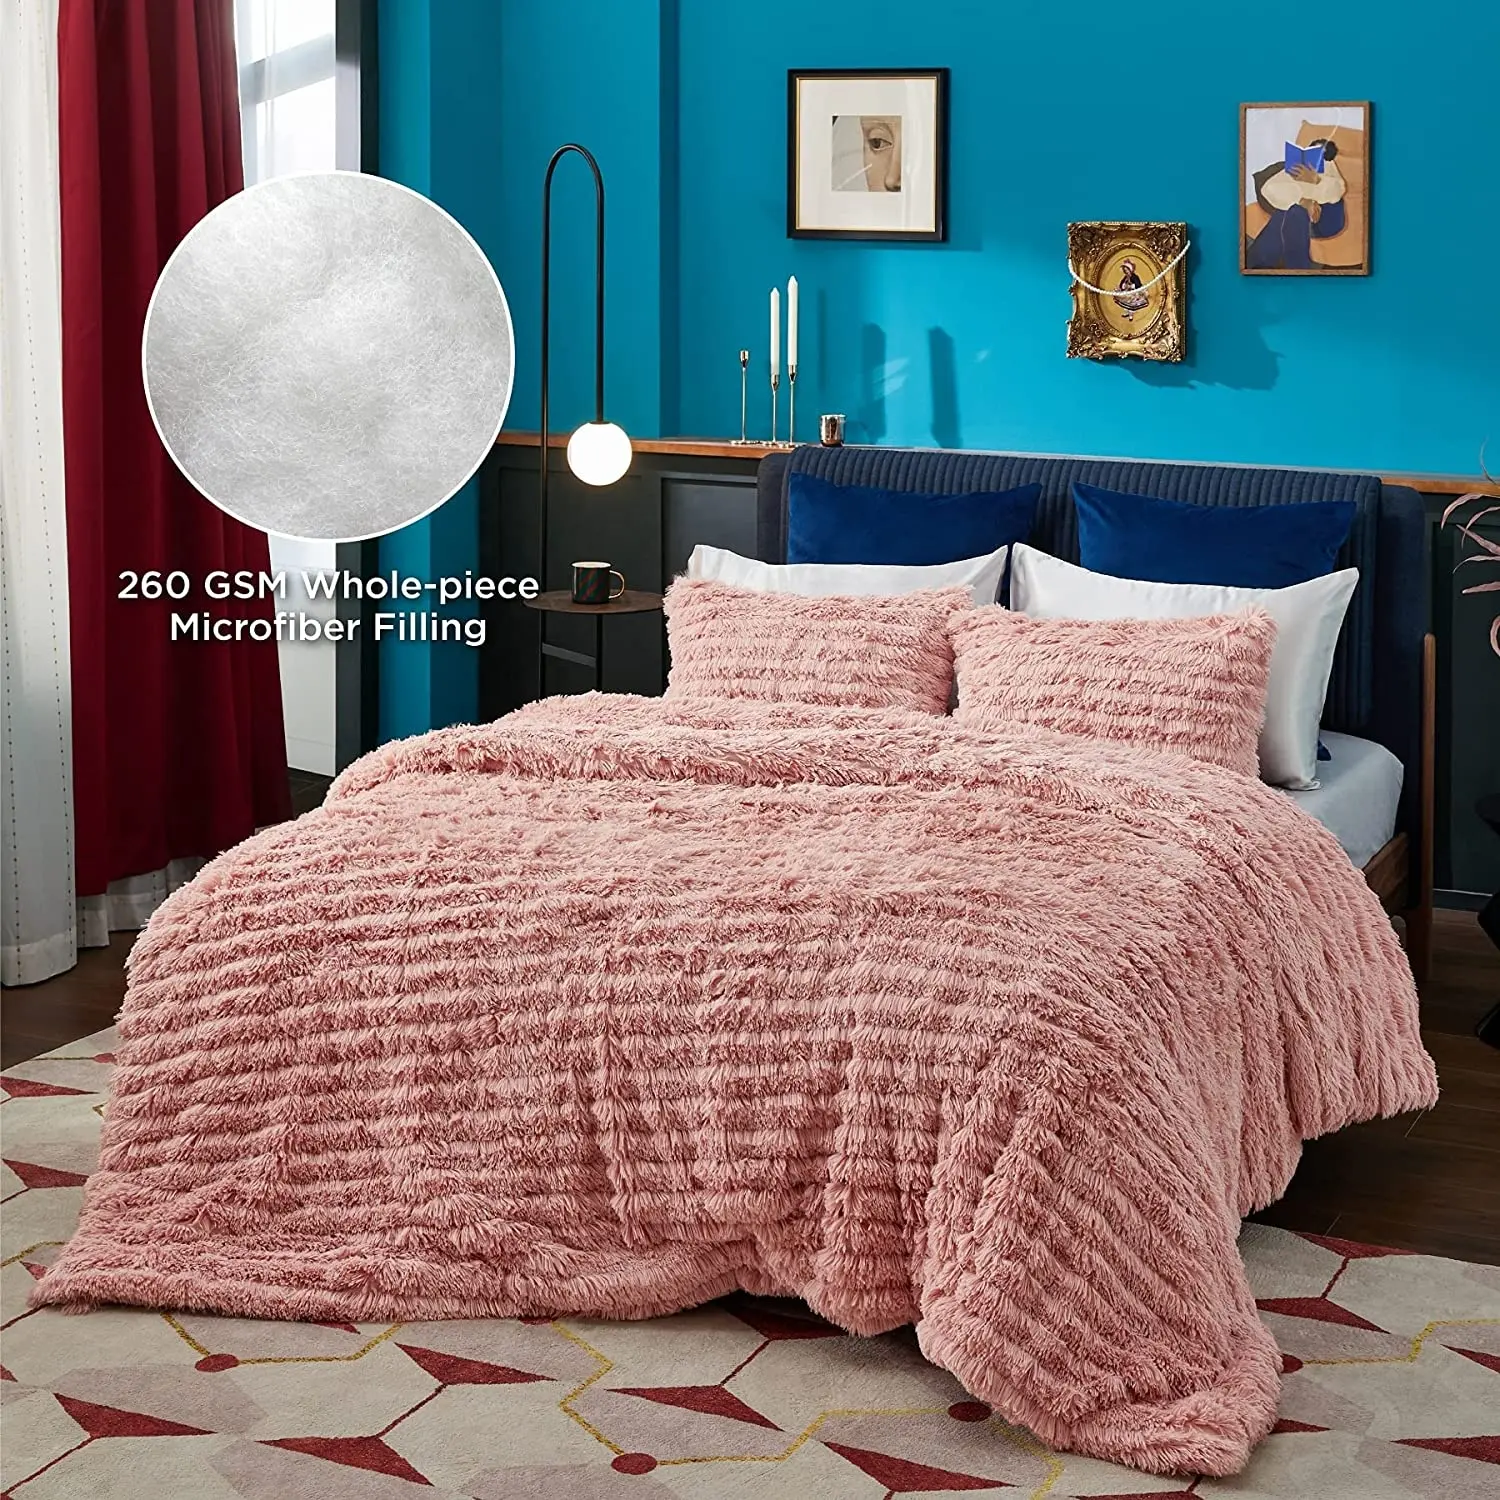 Wholesale Bed Linen Fluffy Pink Comforter Luxury Ultra Soft Plush Shaggy Bedding Set for Home